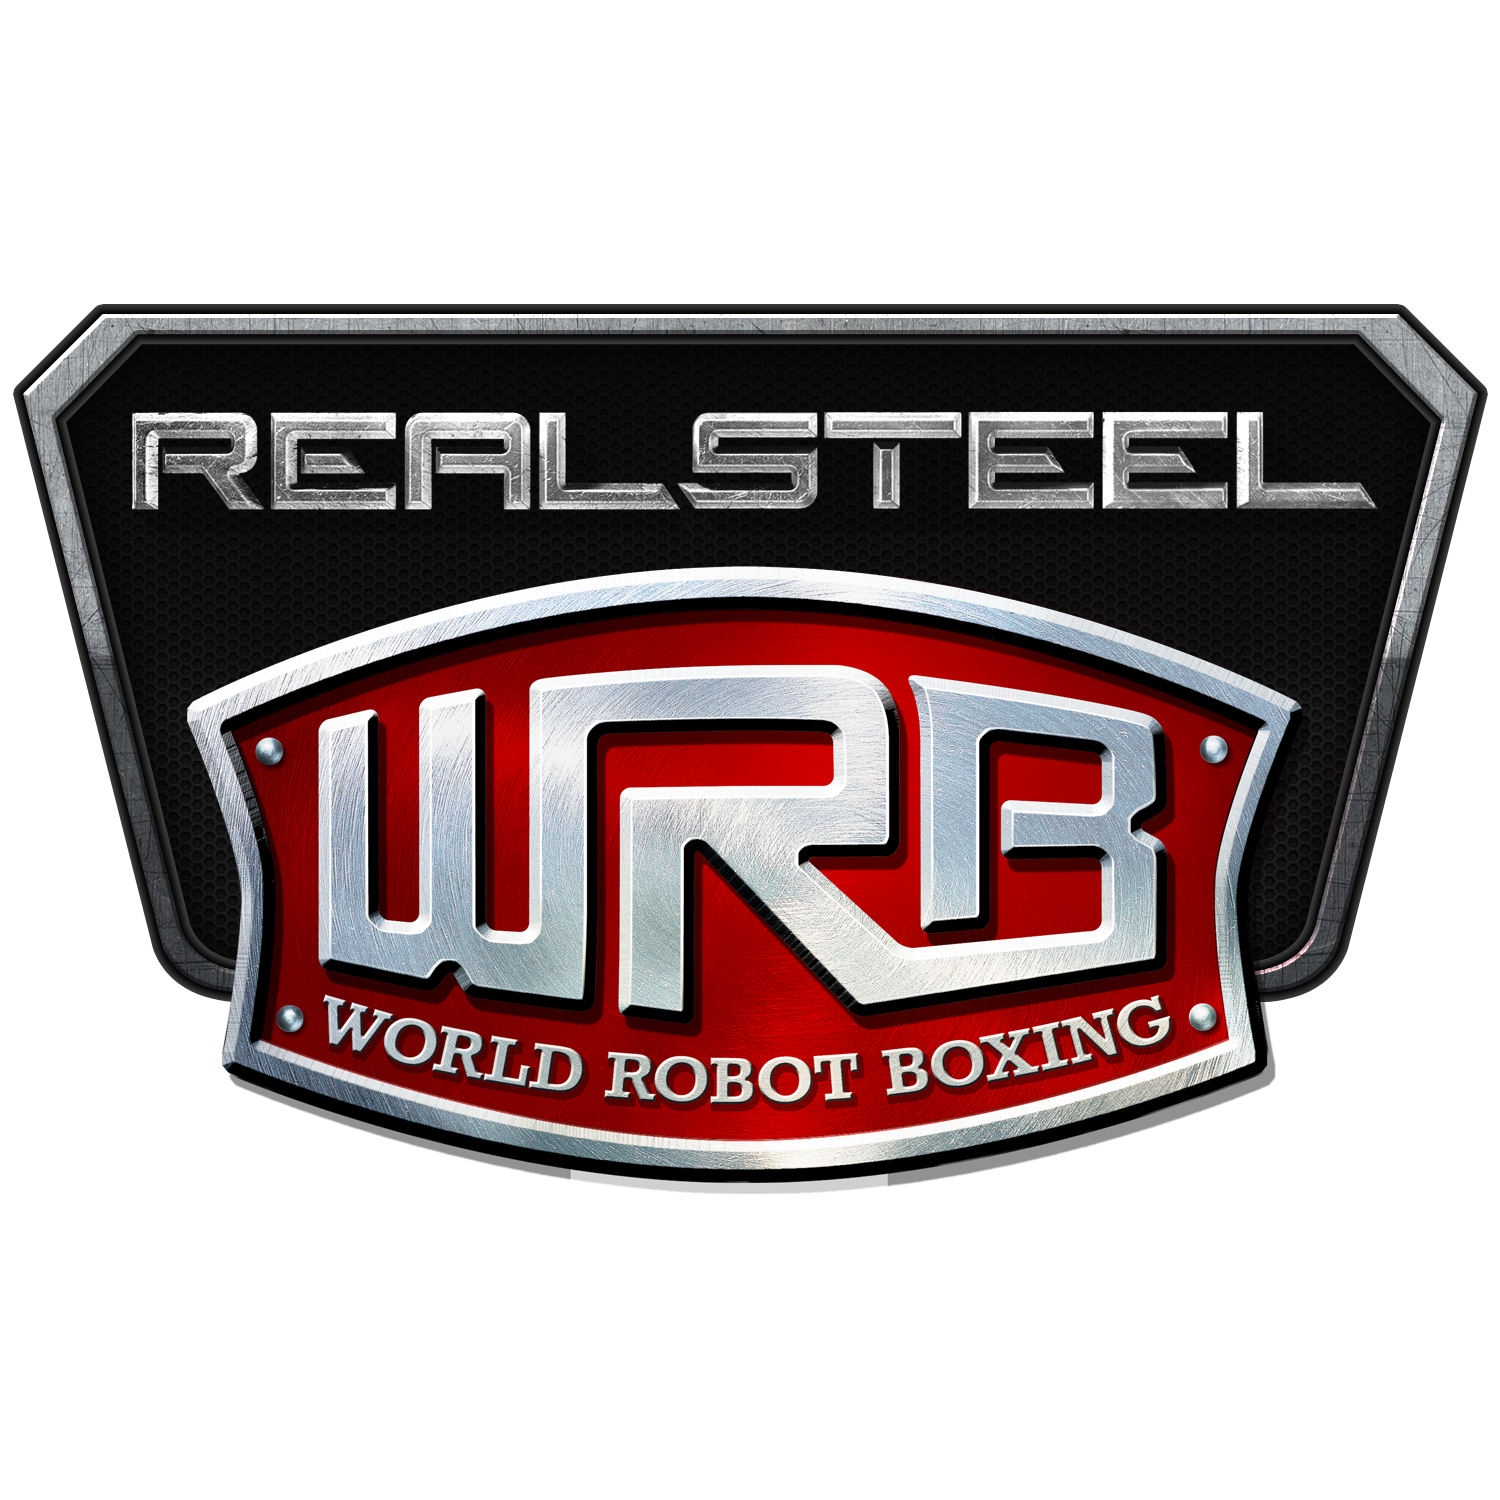 Download 'Real Steel' World Robot Boxing for free on iOS